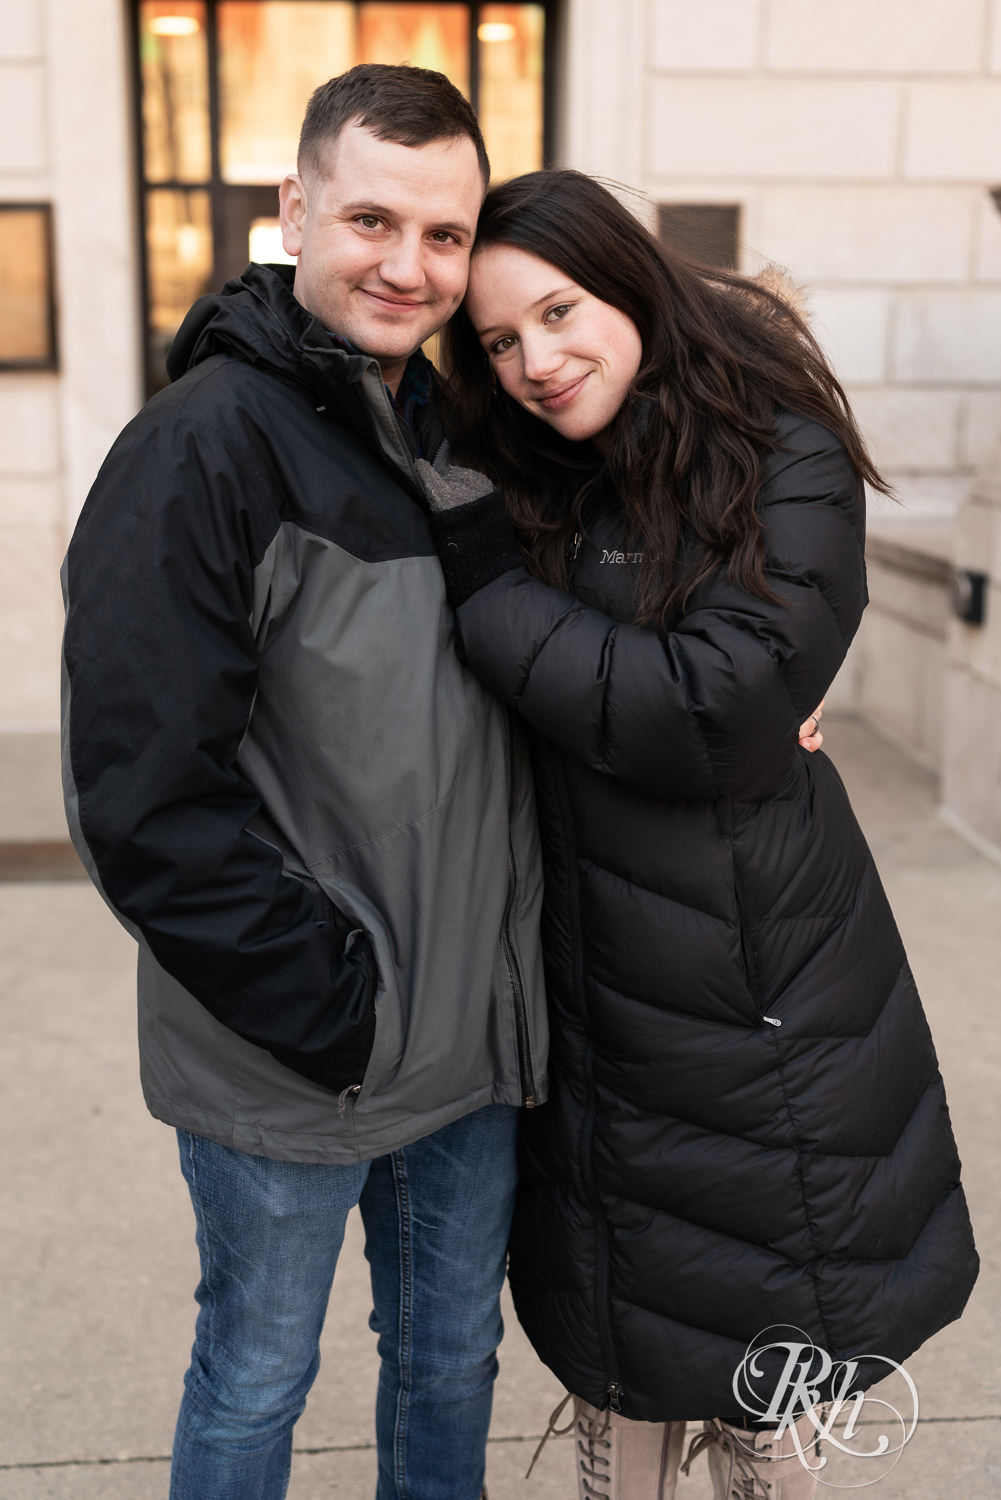 Man and woman in jackets snuggle and smile in front of the Saint Paul Library in Saint Paul, Minnesota during winter engagement session.